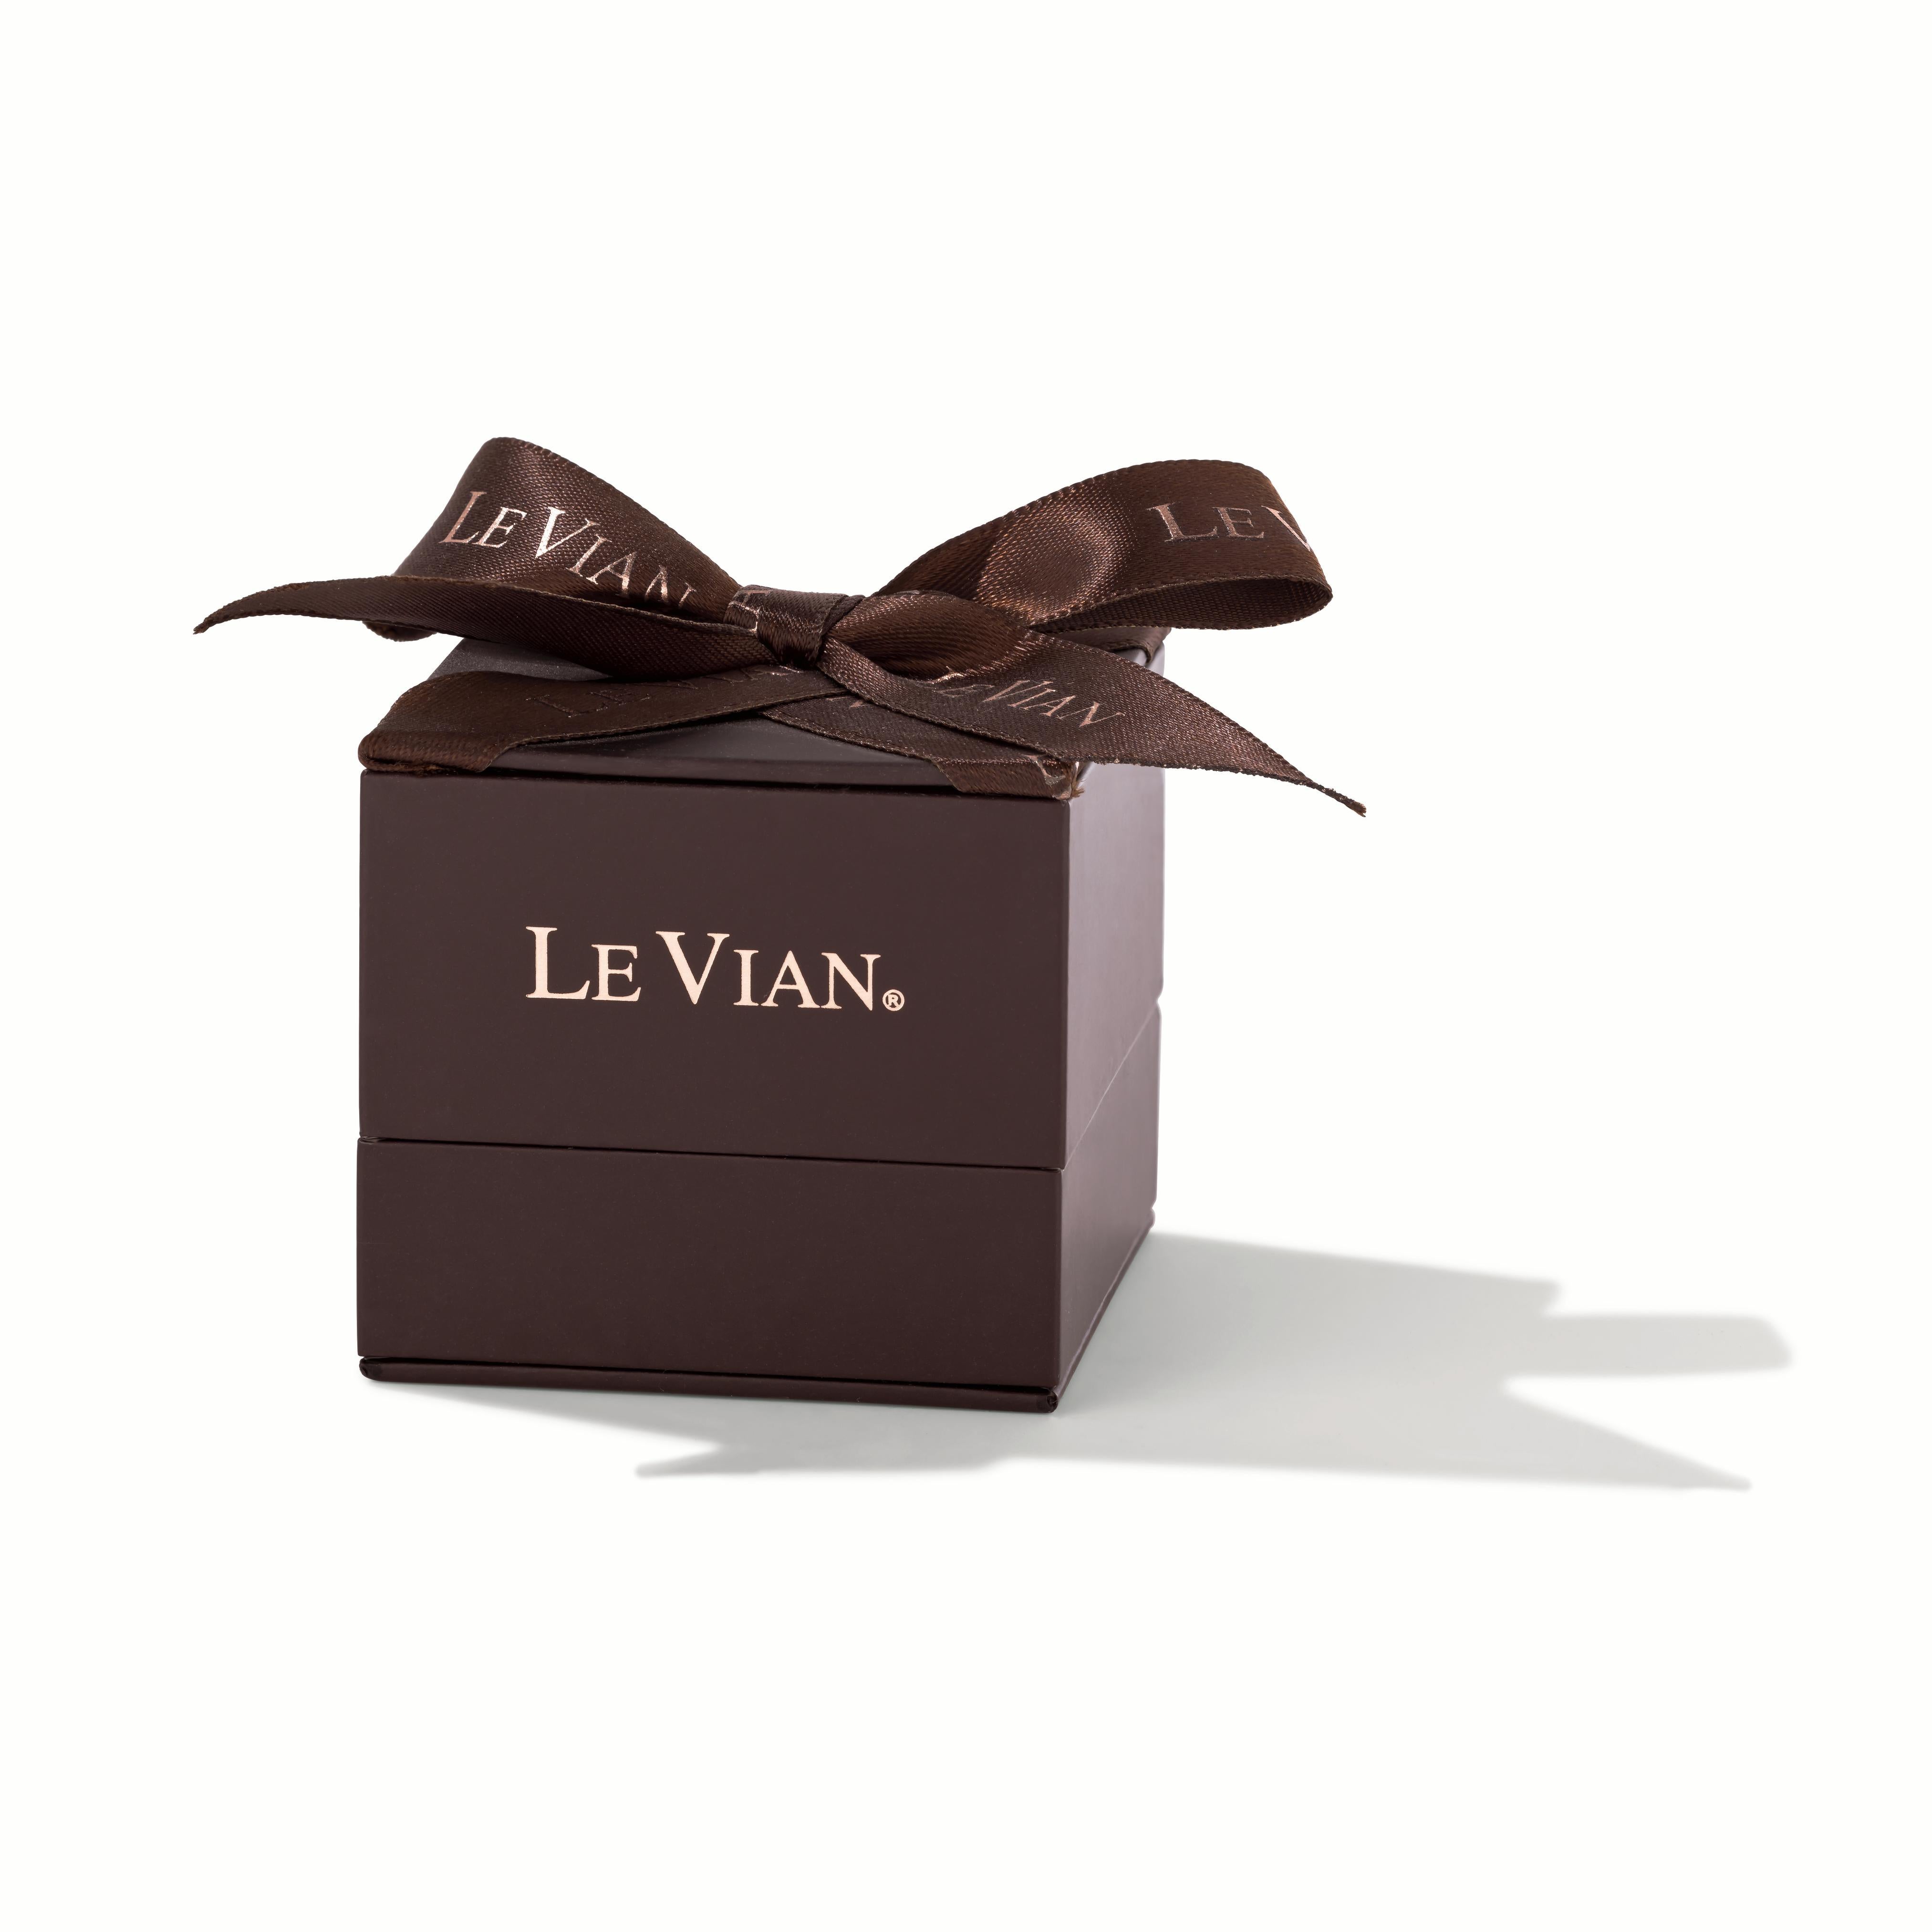 Le Vian® Pendant featuring cts. Chocolate Pearls®, 1/15 cts. Vanilla Diamonds®, 1 cts. Chocolate Diamonds® set in 14K Vanilla Gold®

Item comes with a Le Vian® jewelry box as well as a Le Vian® suede pouch
